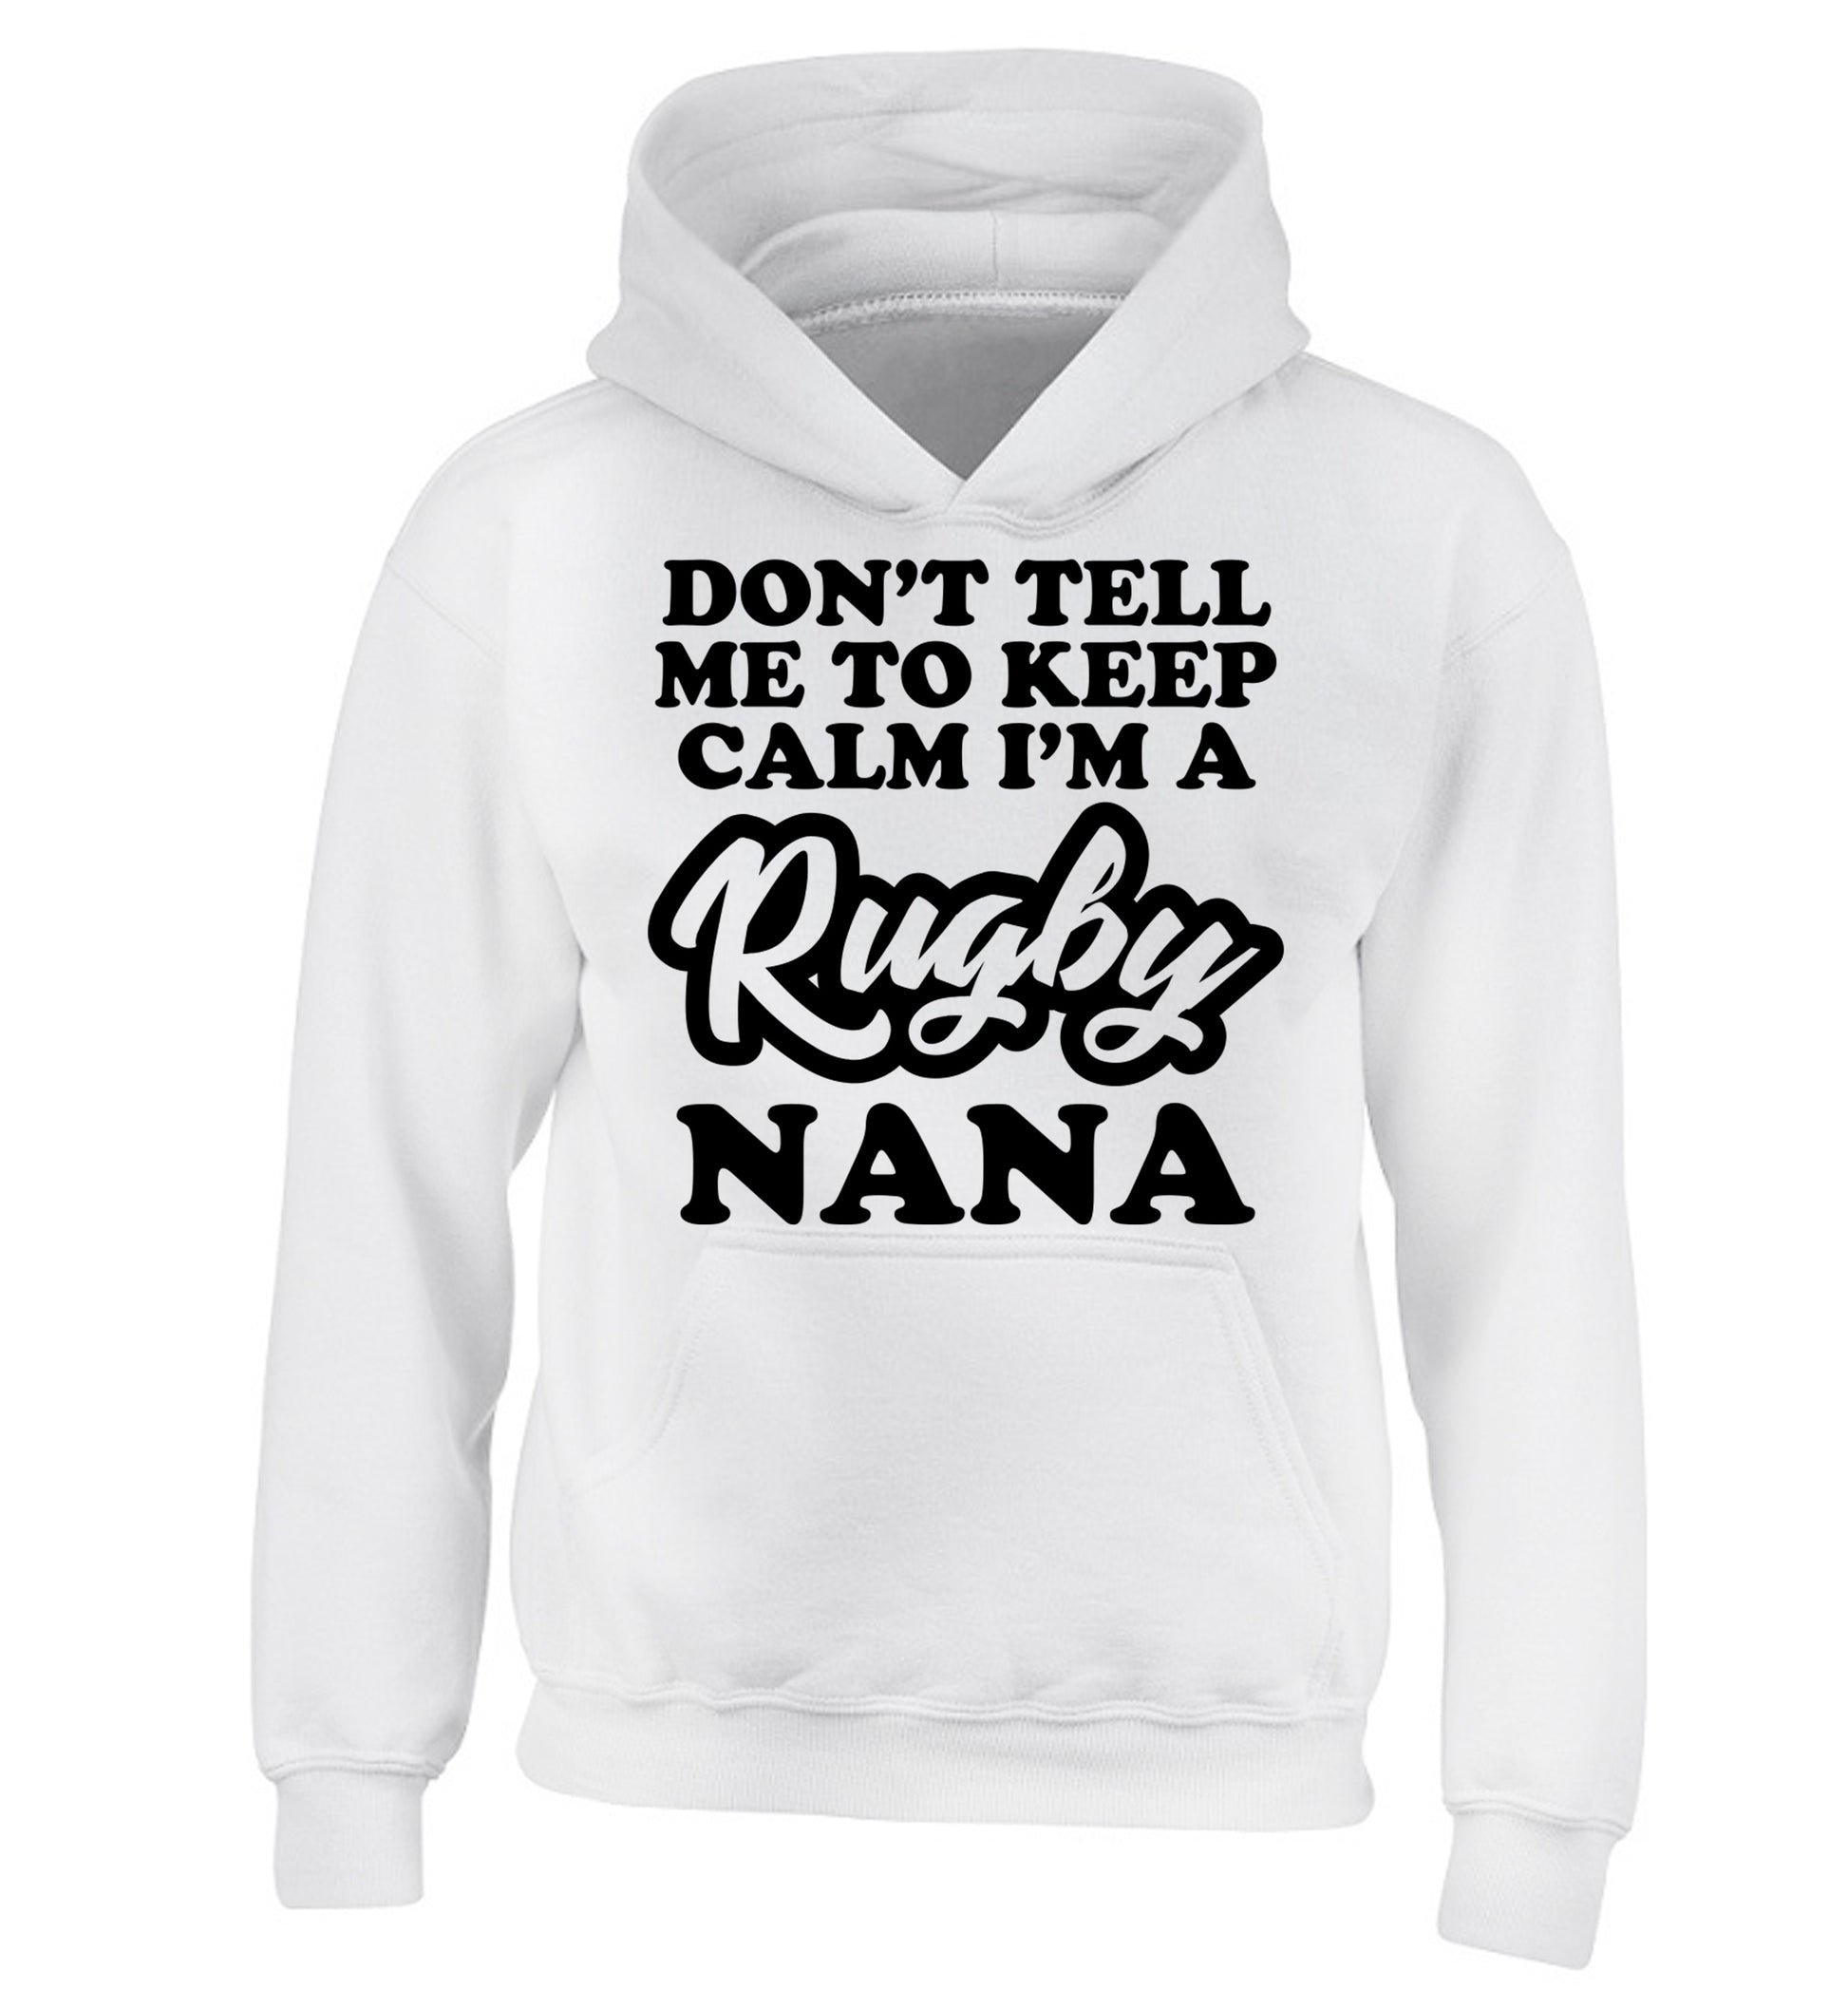 Don't tell me to keep calm I'm a rugby nana children's white hoodie 12-13 Years